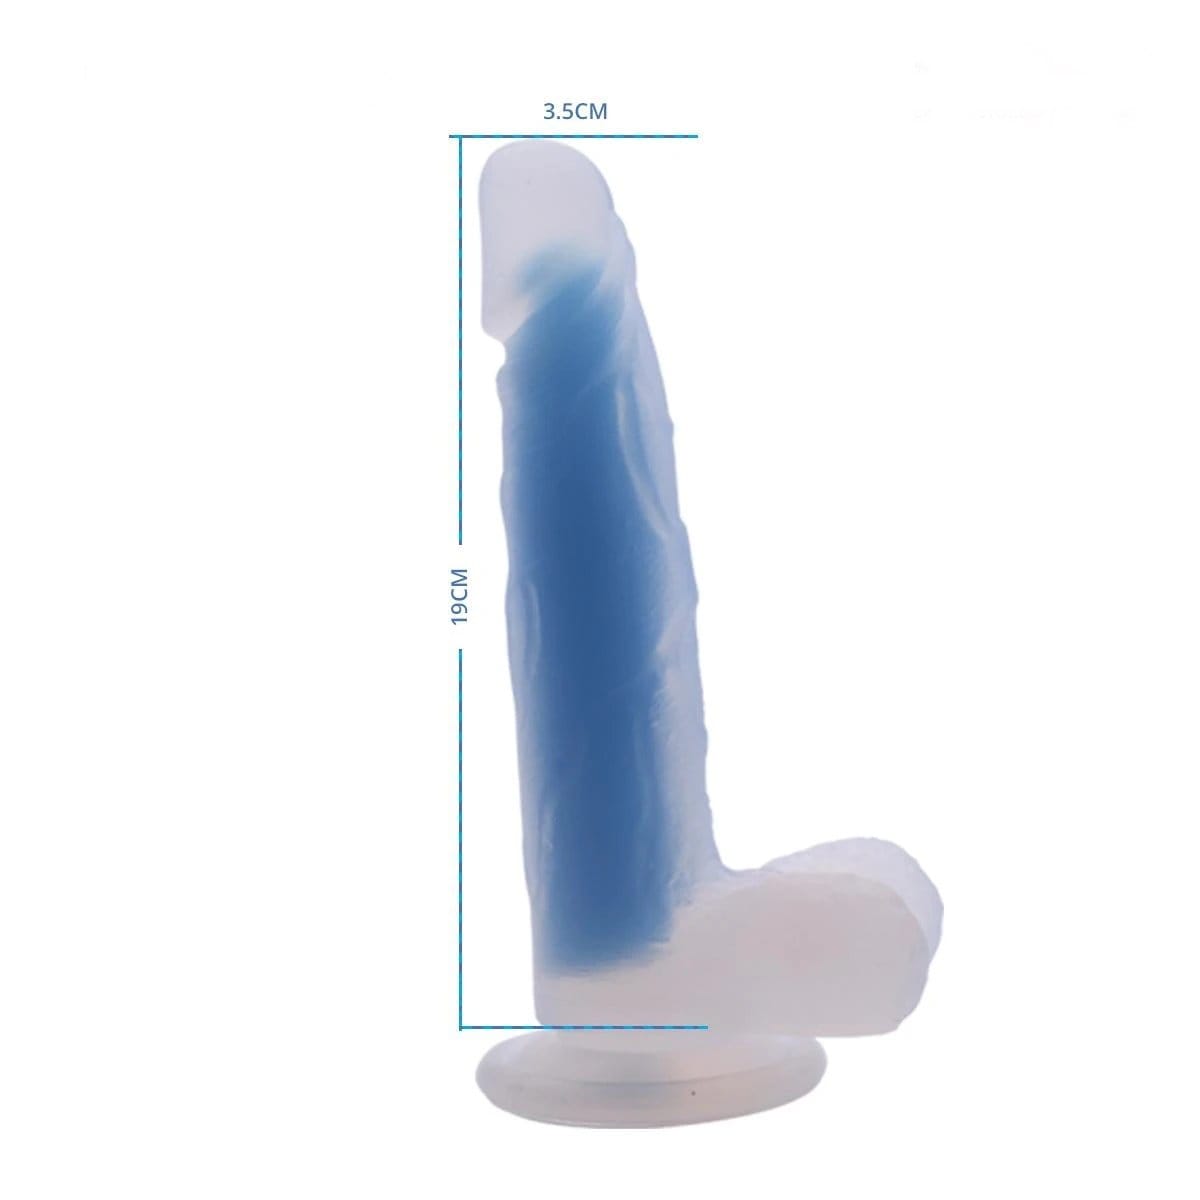 Orange glow in the dark dildo with 5.9 inches insertable length image.